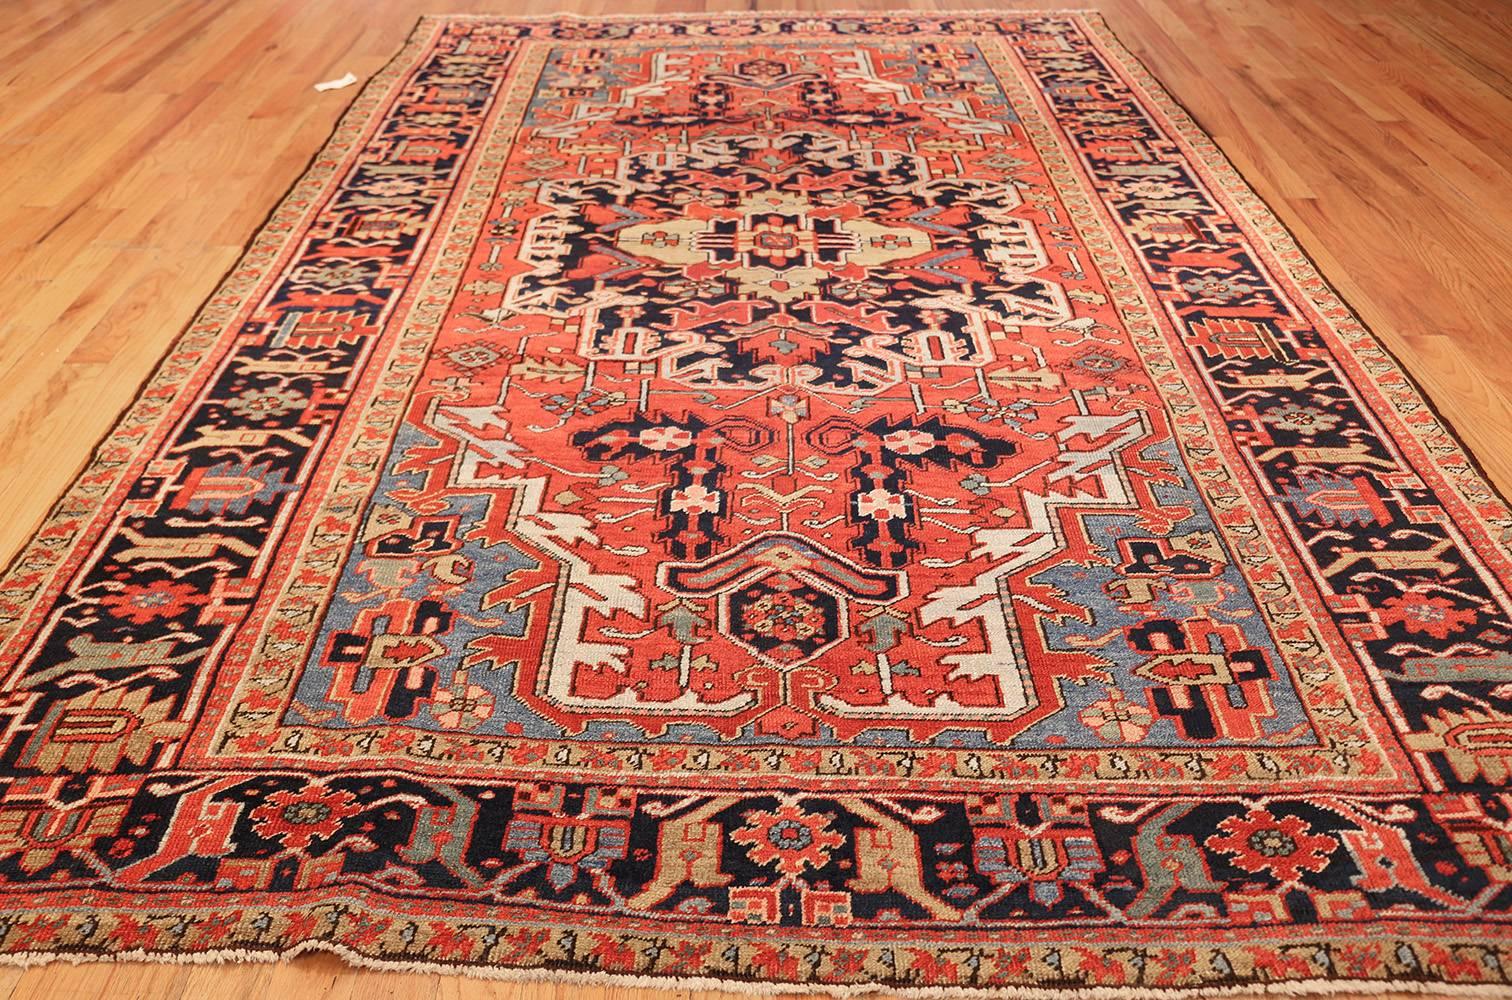 Hand-Knotted Antique Red Background Heriz Persian Rug. Size: 7 ft 2 in x 10 ft 10 in 